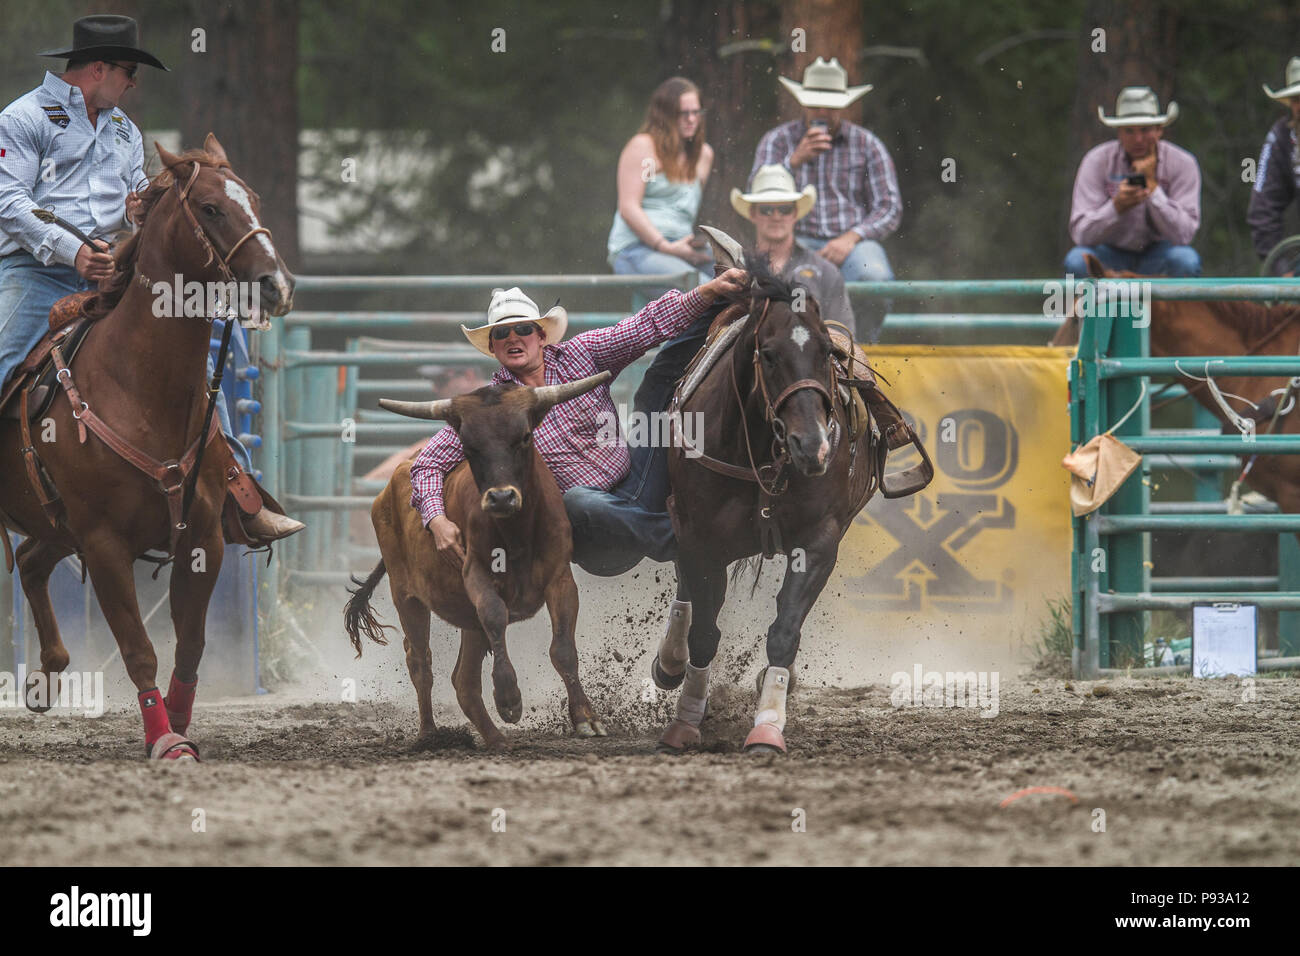 Steer Wrestling, get down and in the dirt. Exciting rodeo event, man vs steer. Action packed, jumps from movng horse to wrestle steer to ground. Lucus Stock Photo